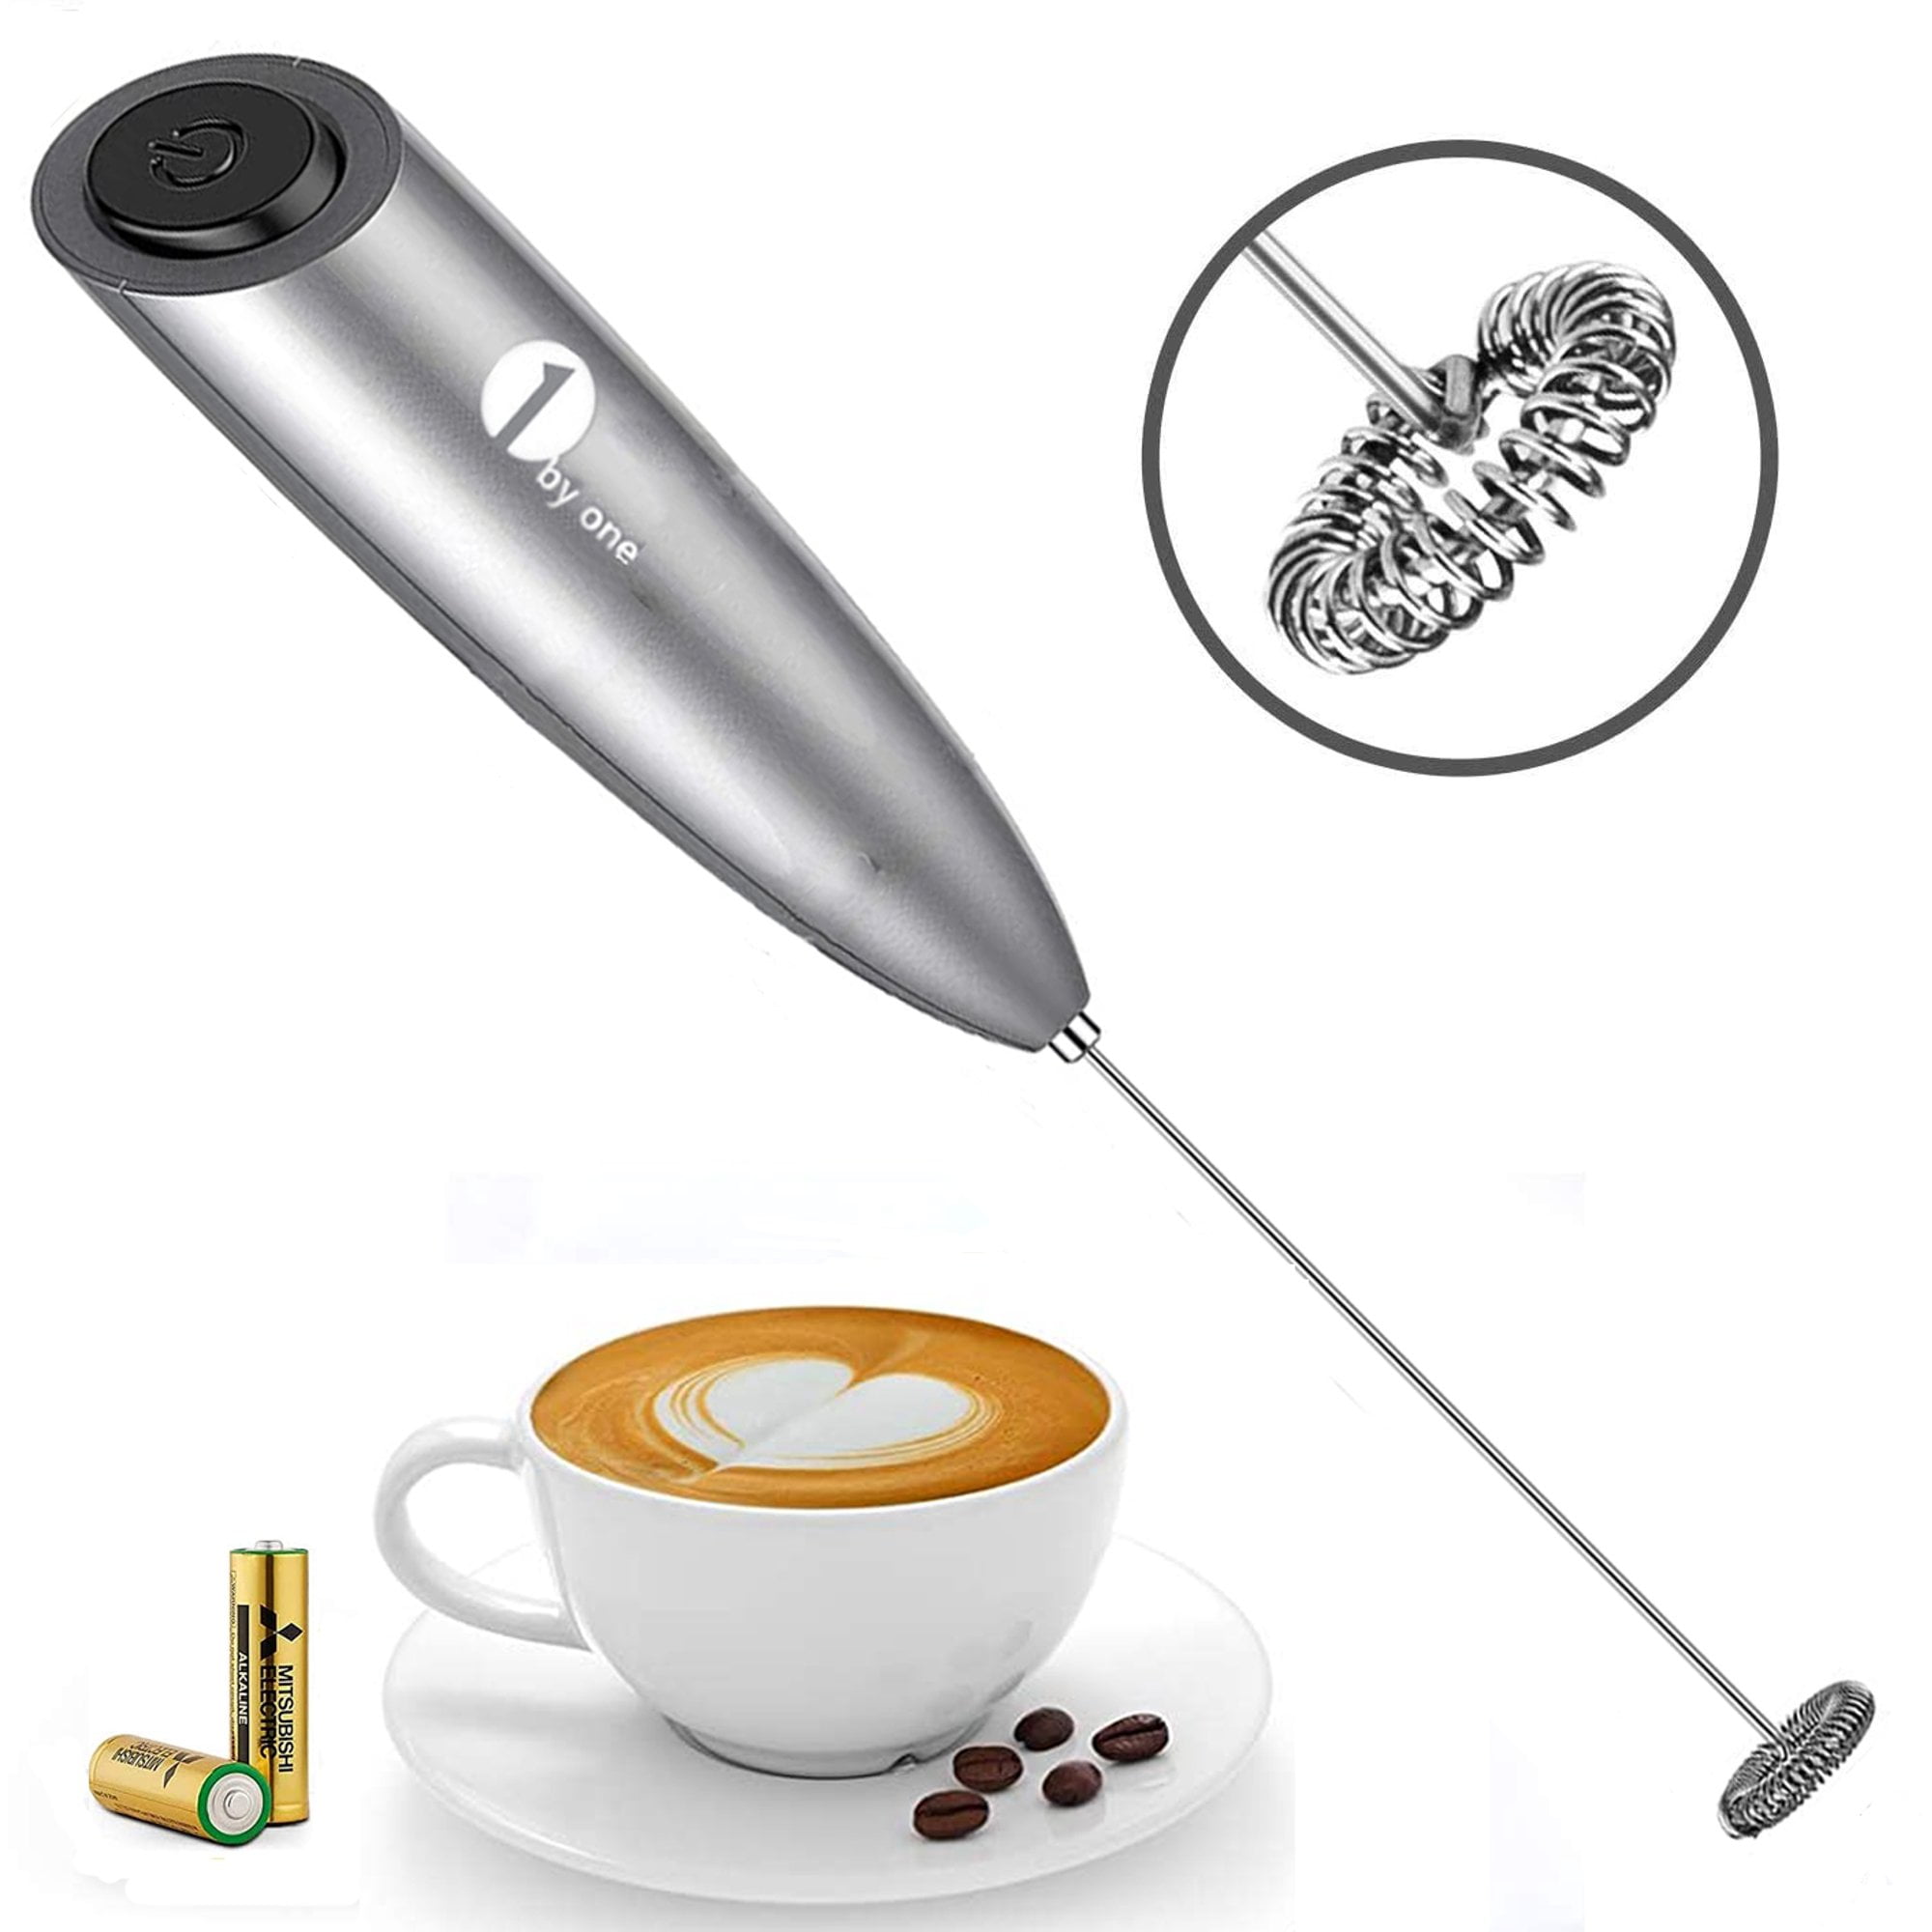  SIMPLETaste Electric Milk Frother, Automatic Battery